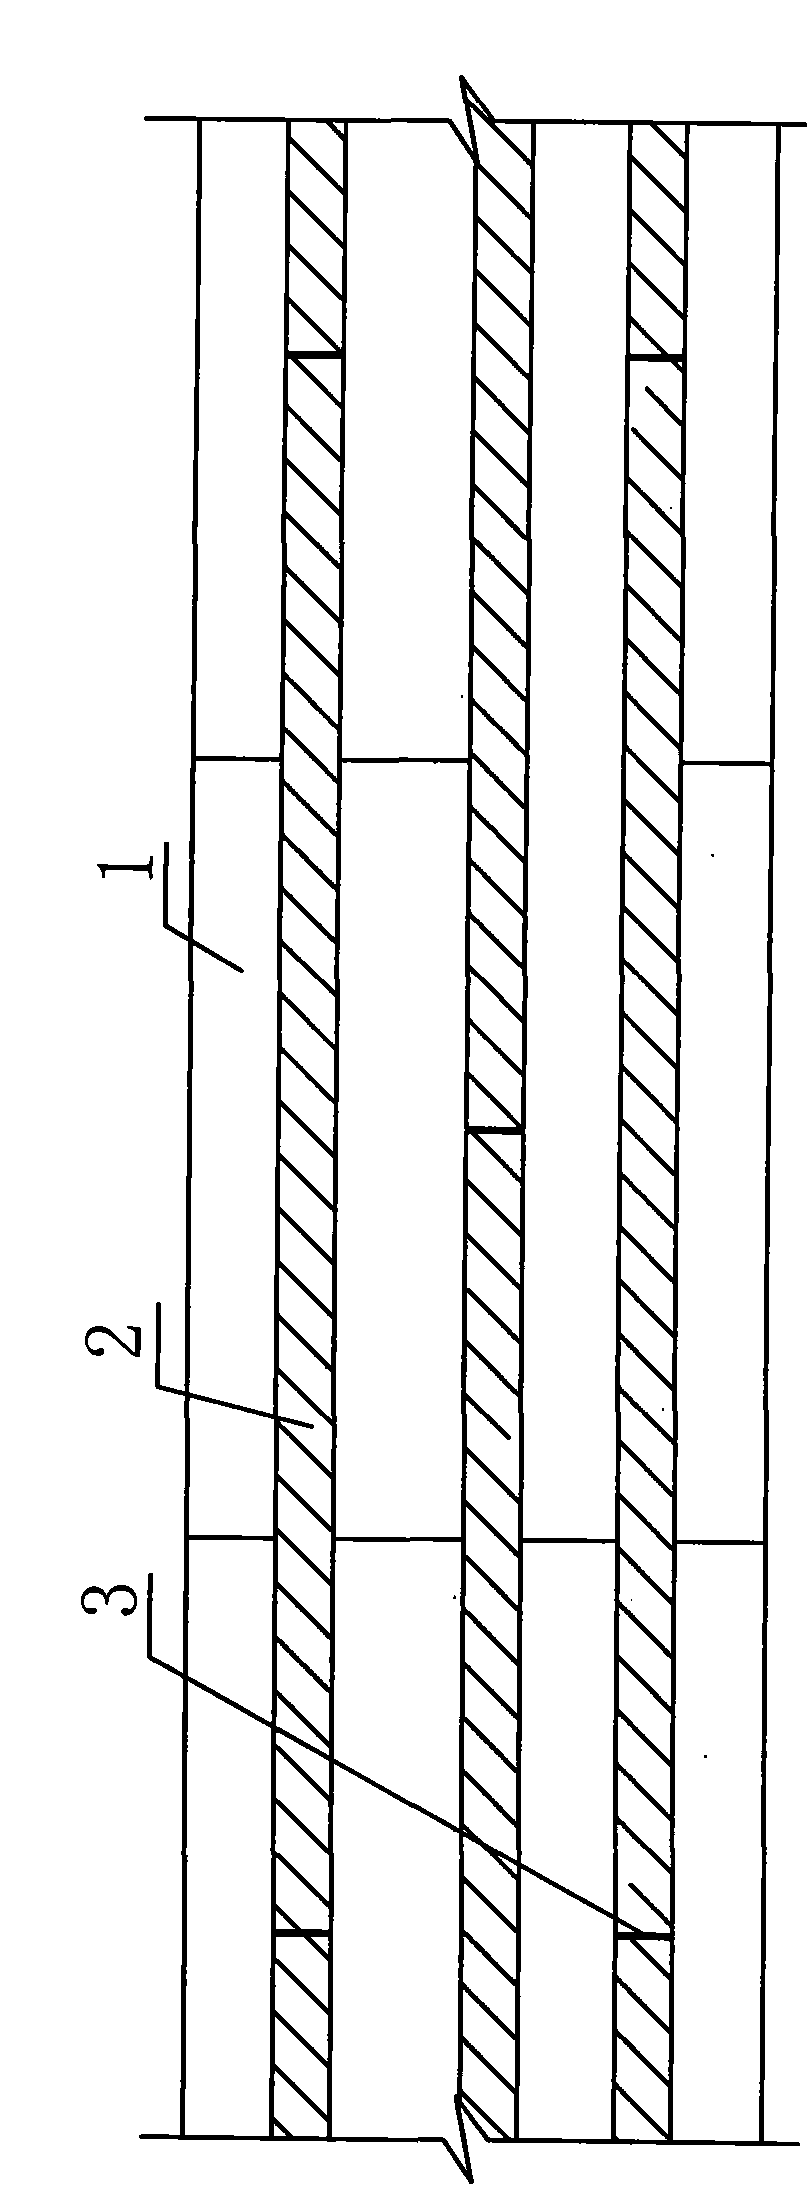 Construction method for supporting template at construction joint of frame structure